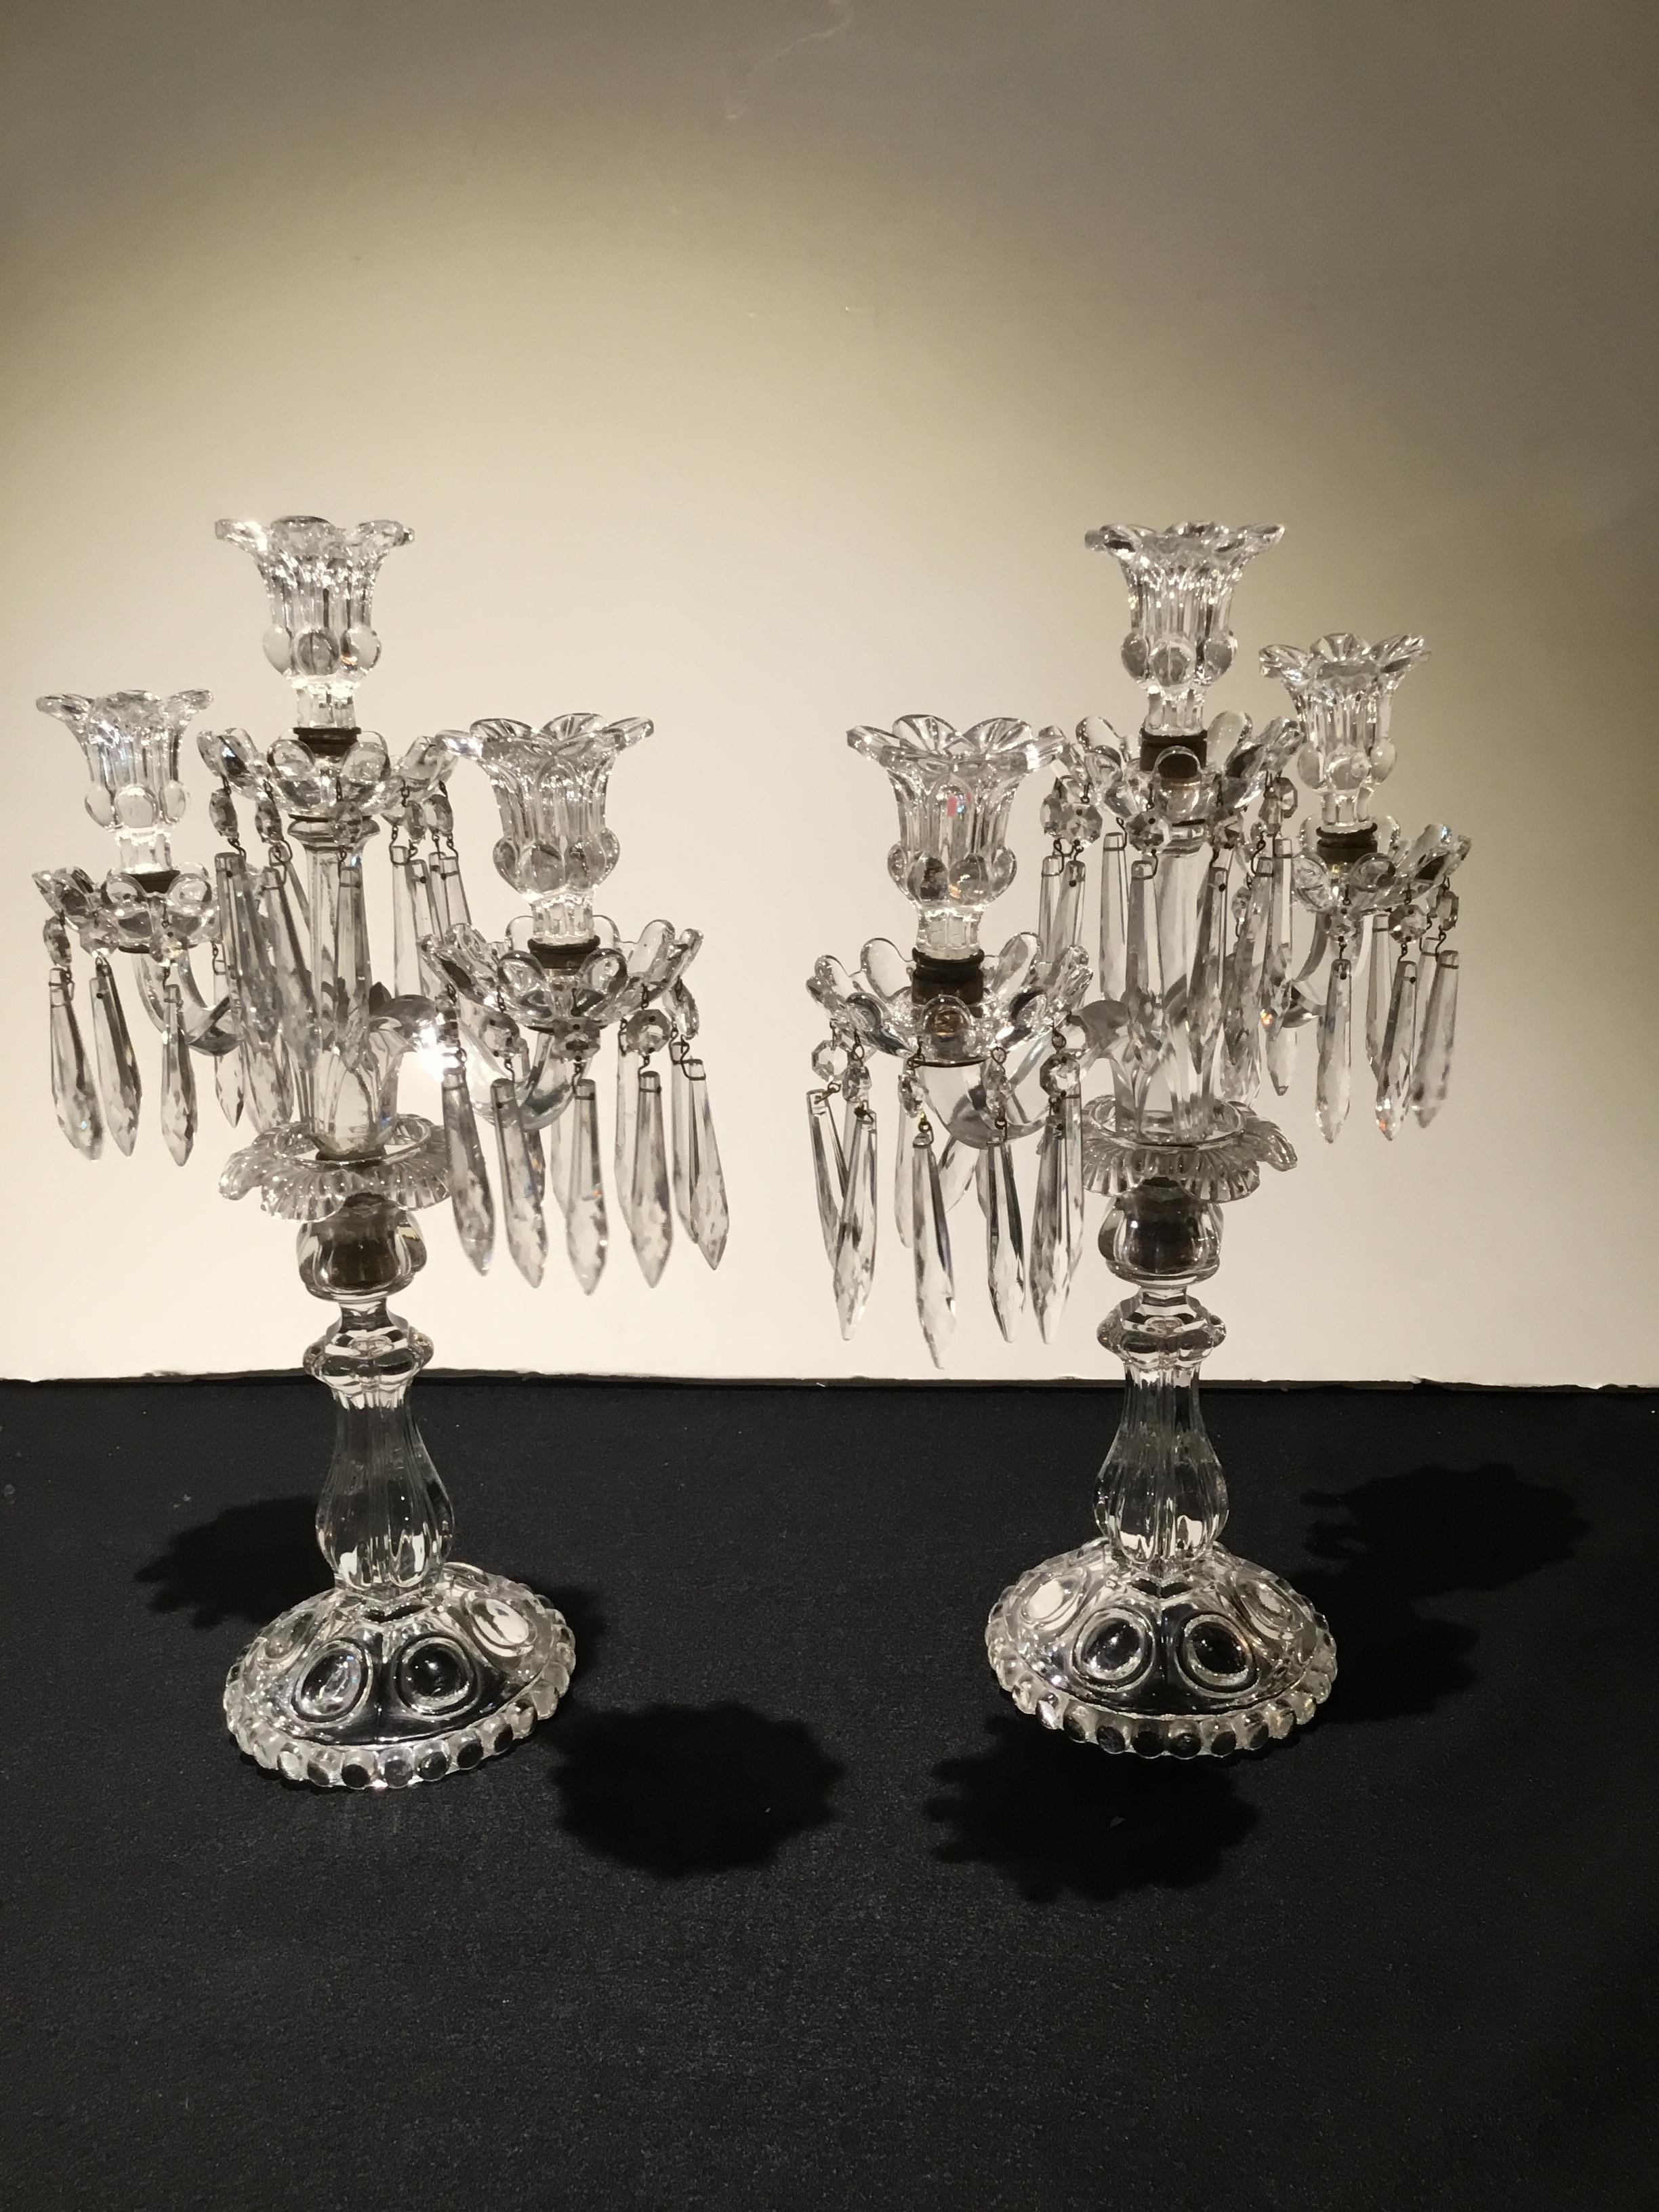 Elegant three-light crystal baccarat candelabrum. Beautifully shaped
Central support holding three candles each.